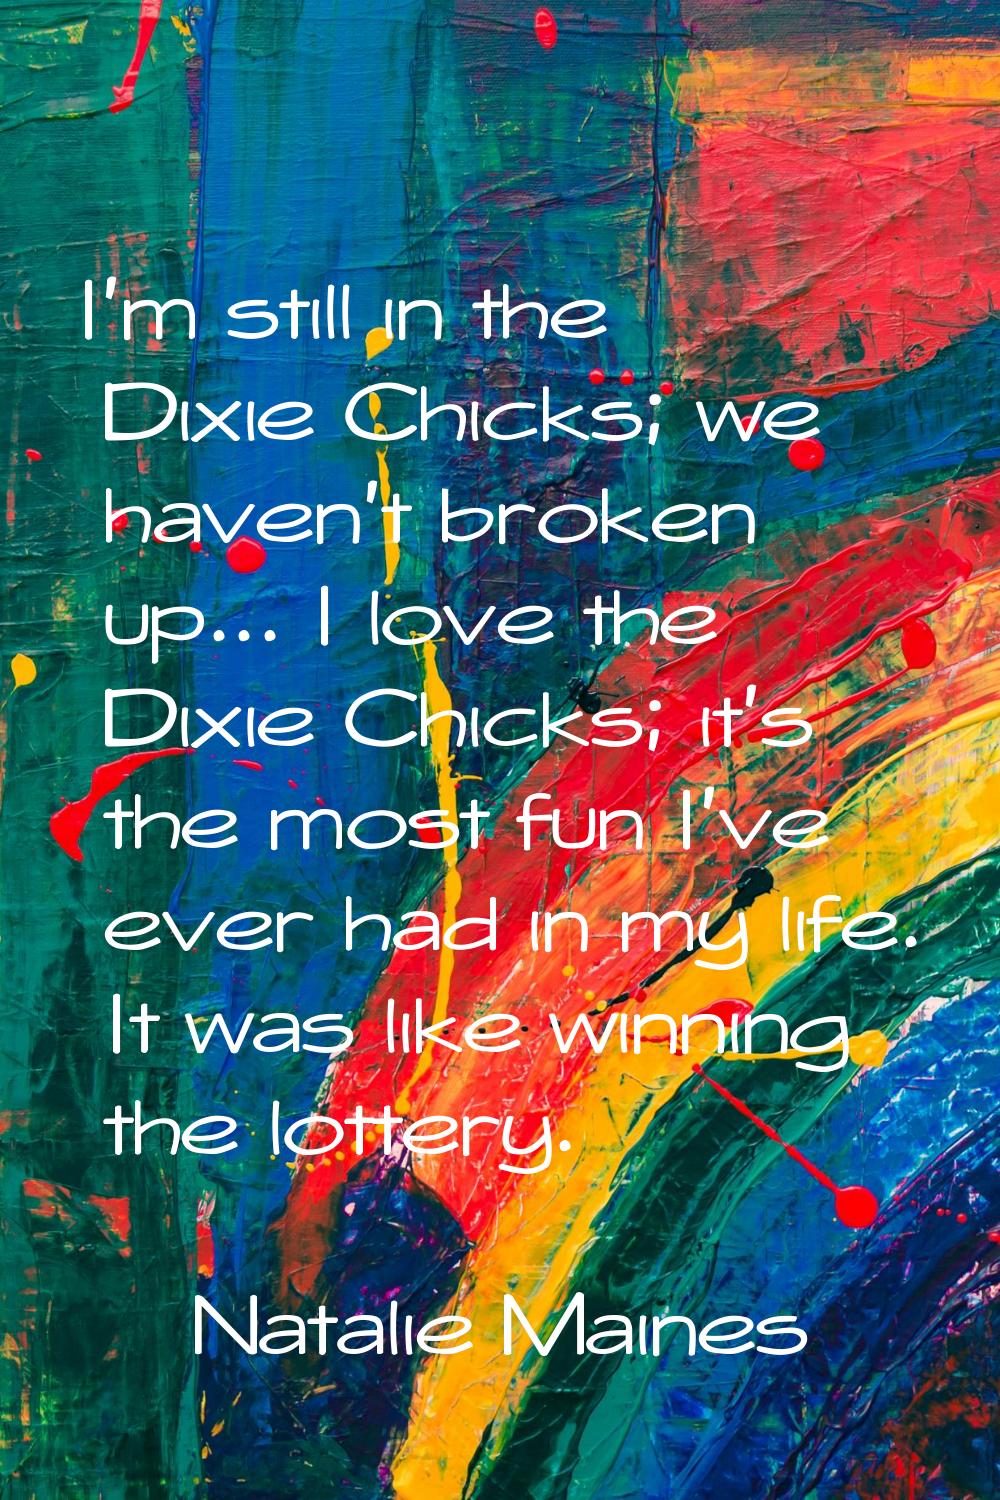 I'm still in the Dixie Chicks; we haven't broken up... I love the Dixie Chicks; it's the most fun I